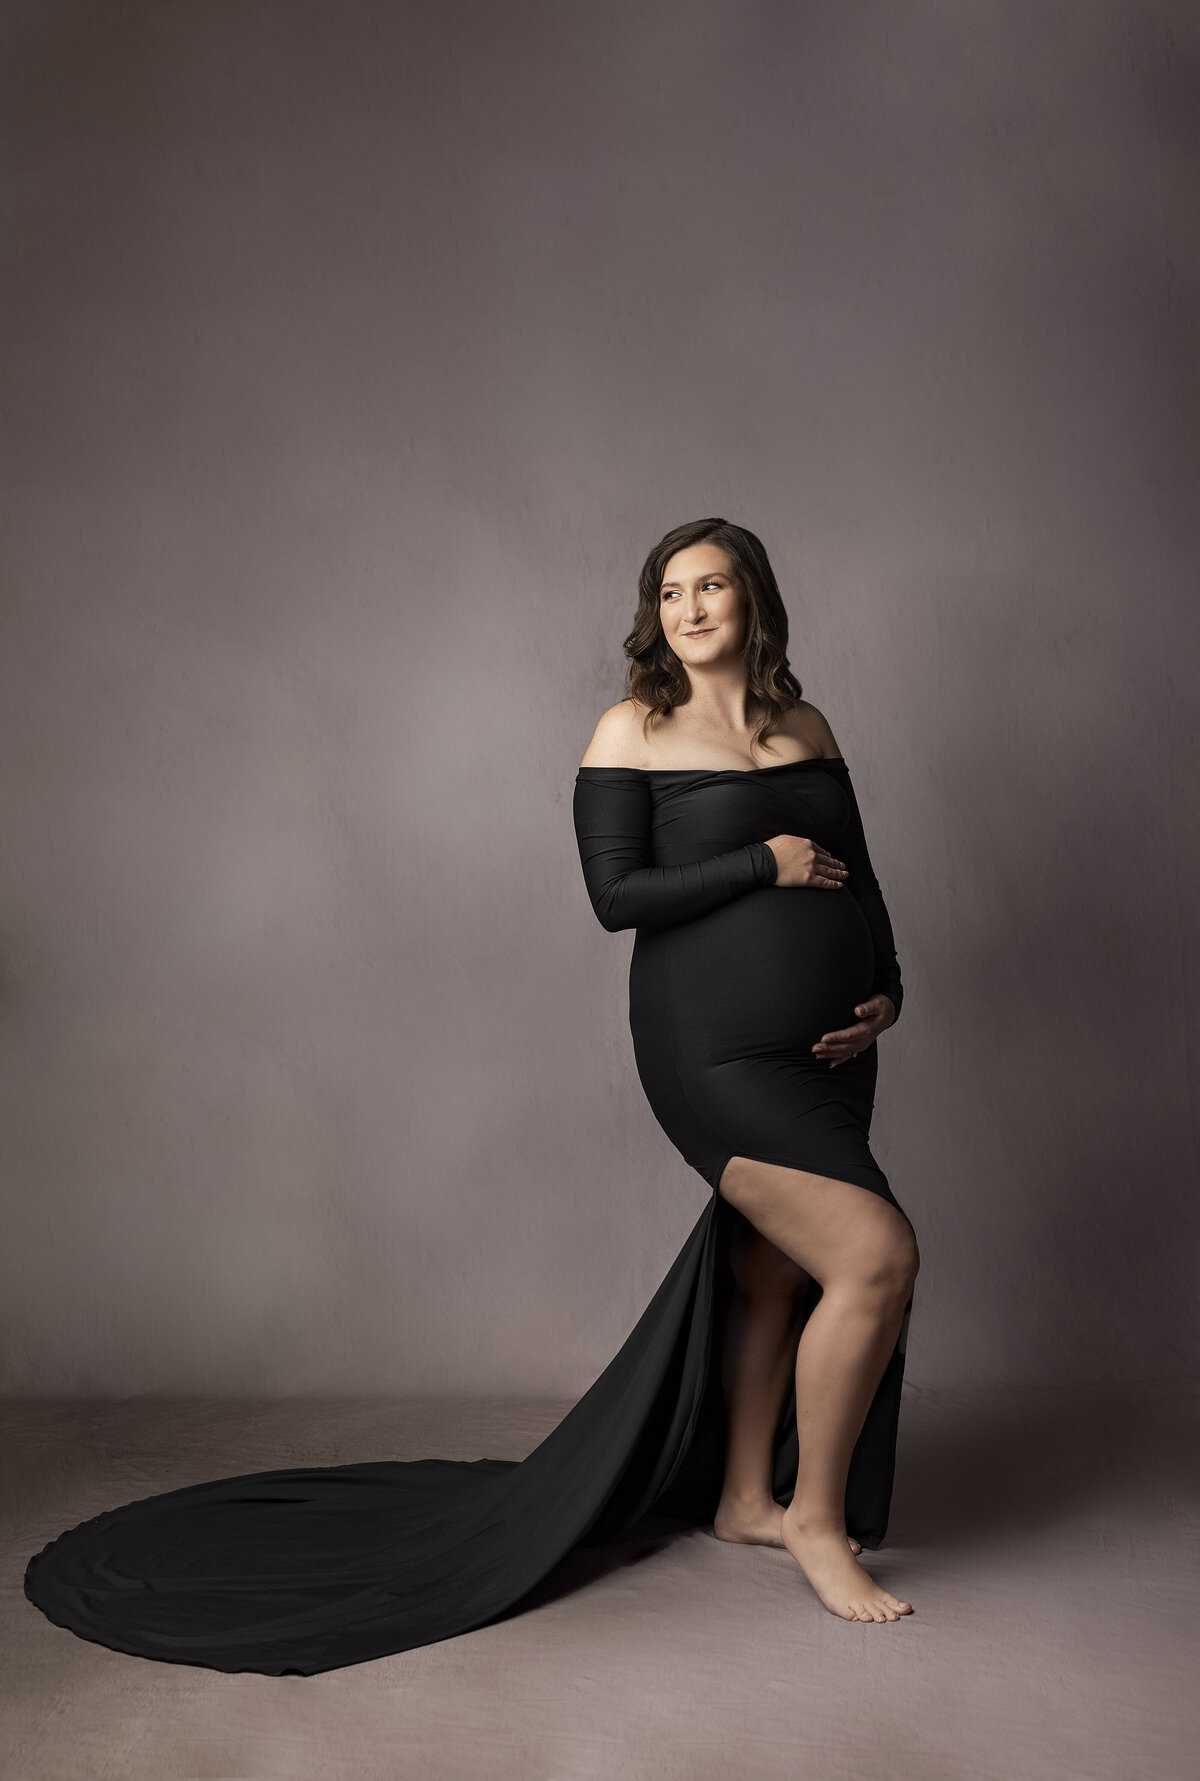 mother in black dress holding pregnant belly